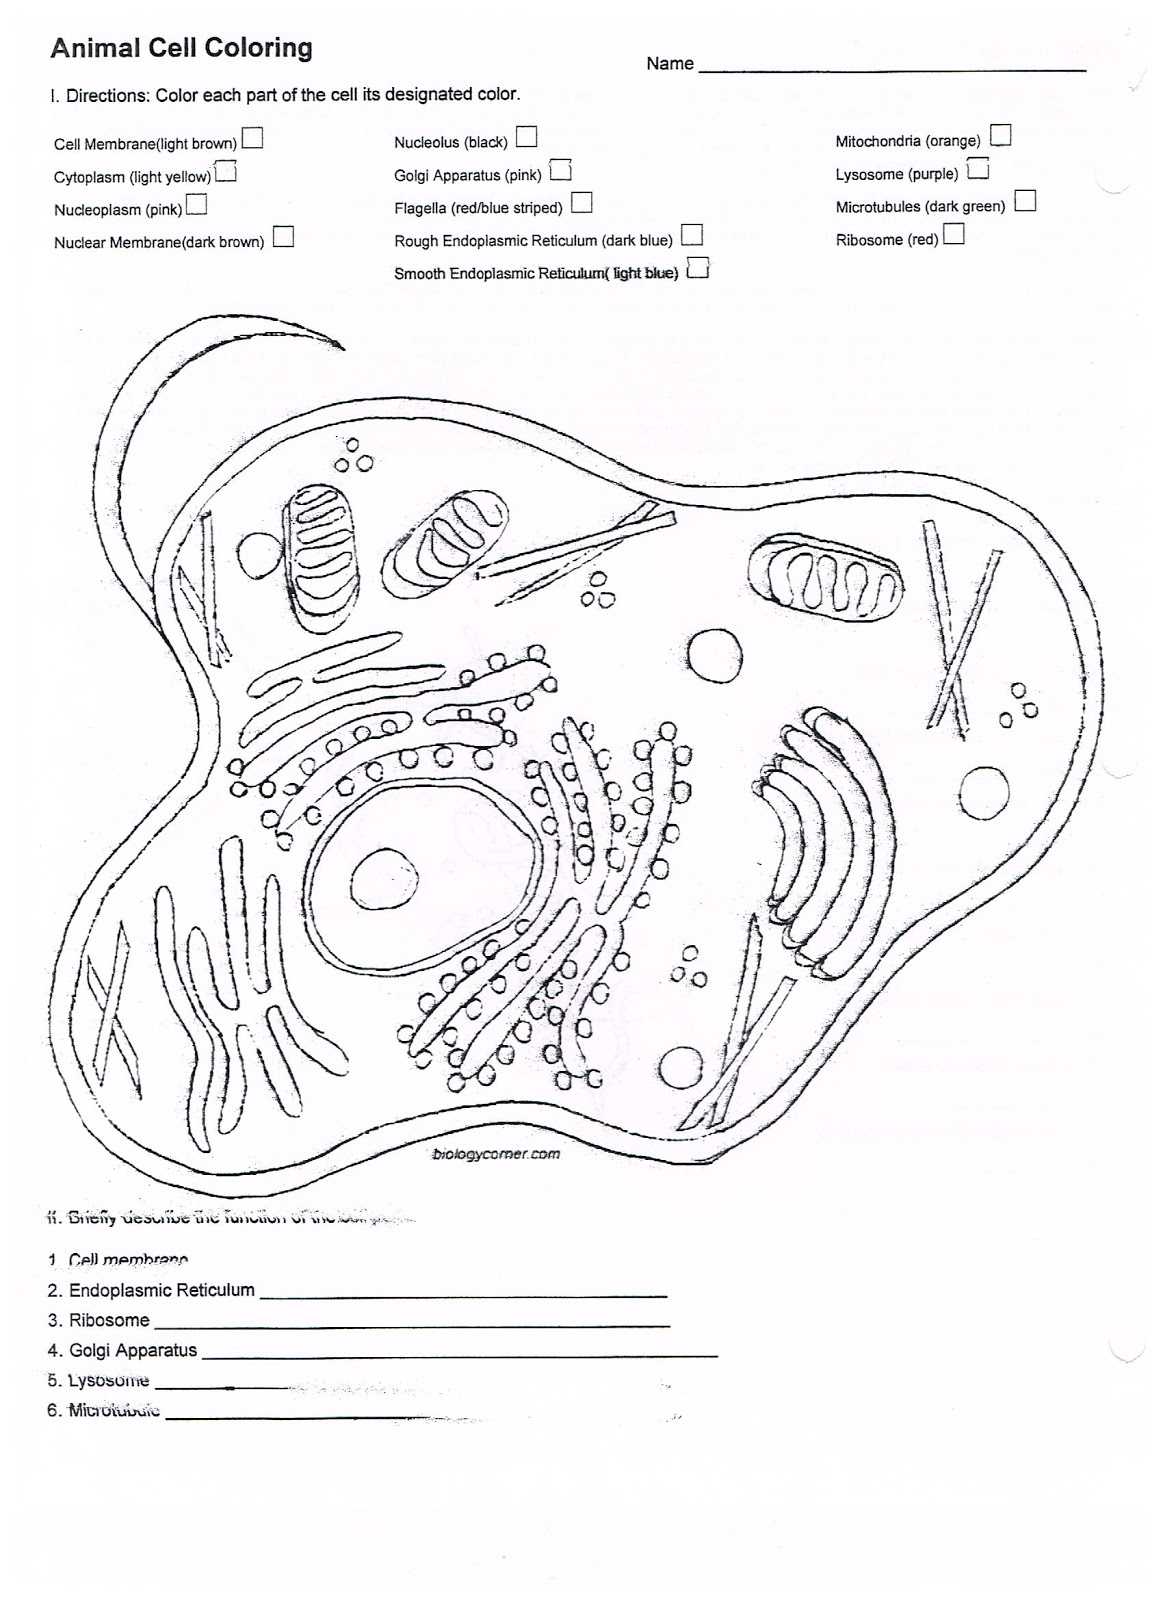 Plant and Animal Cell Coloring Worksheets or Free Coloring Pages Of Plant Cell Worksheet